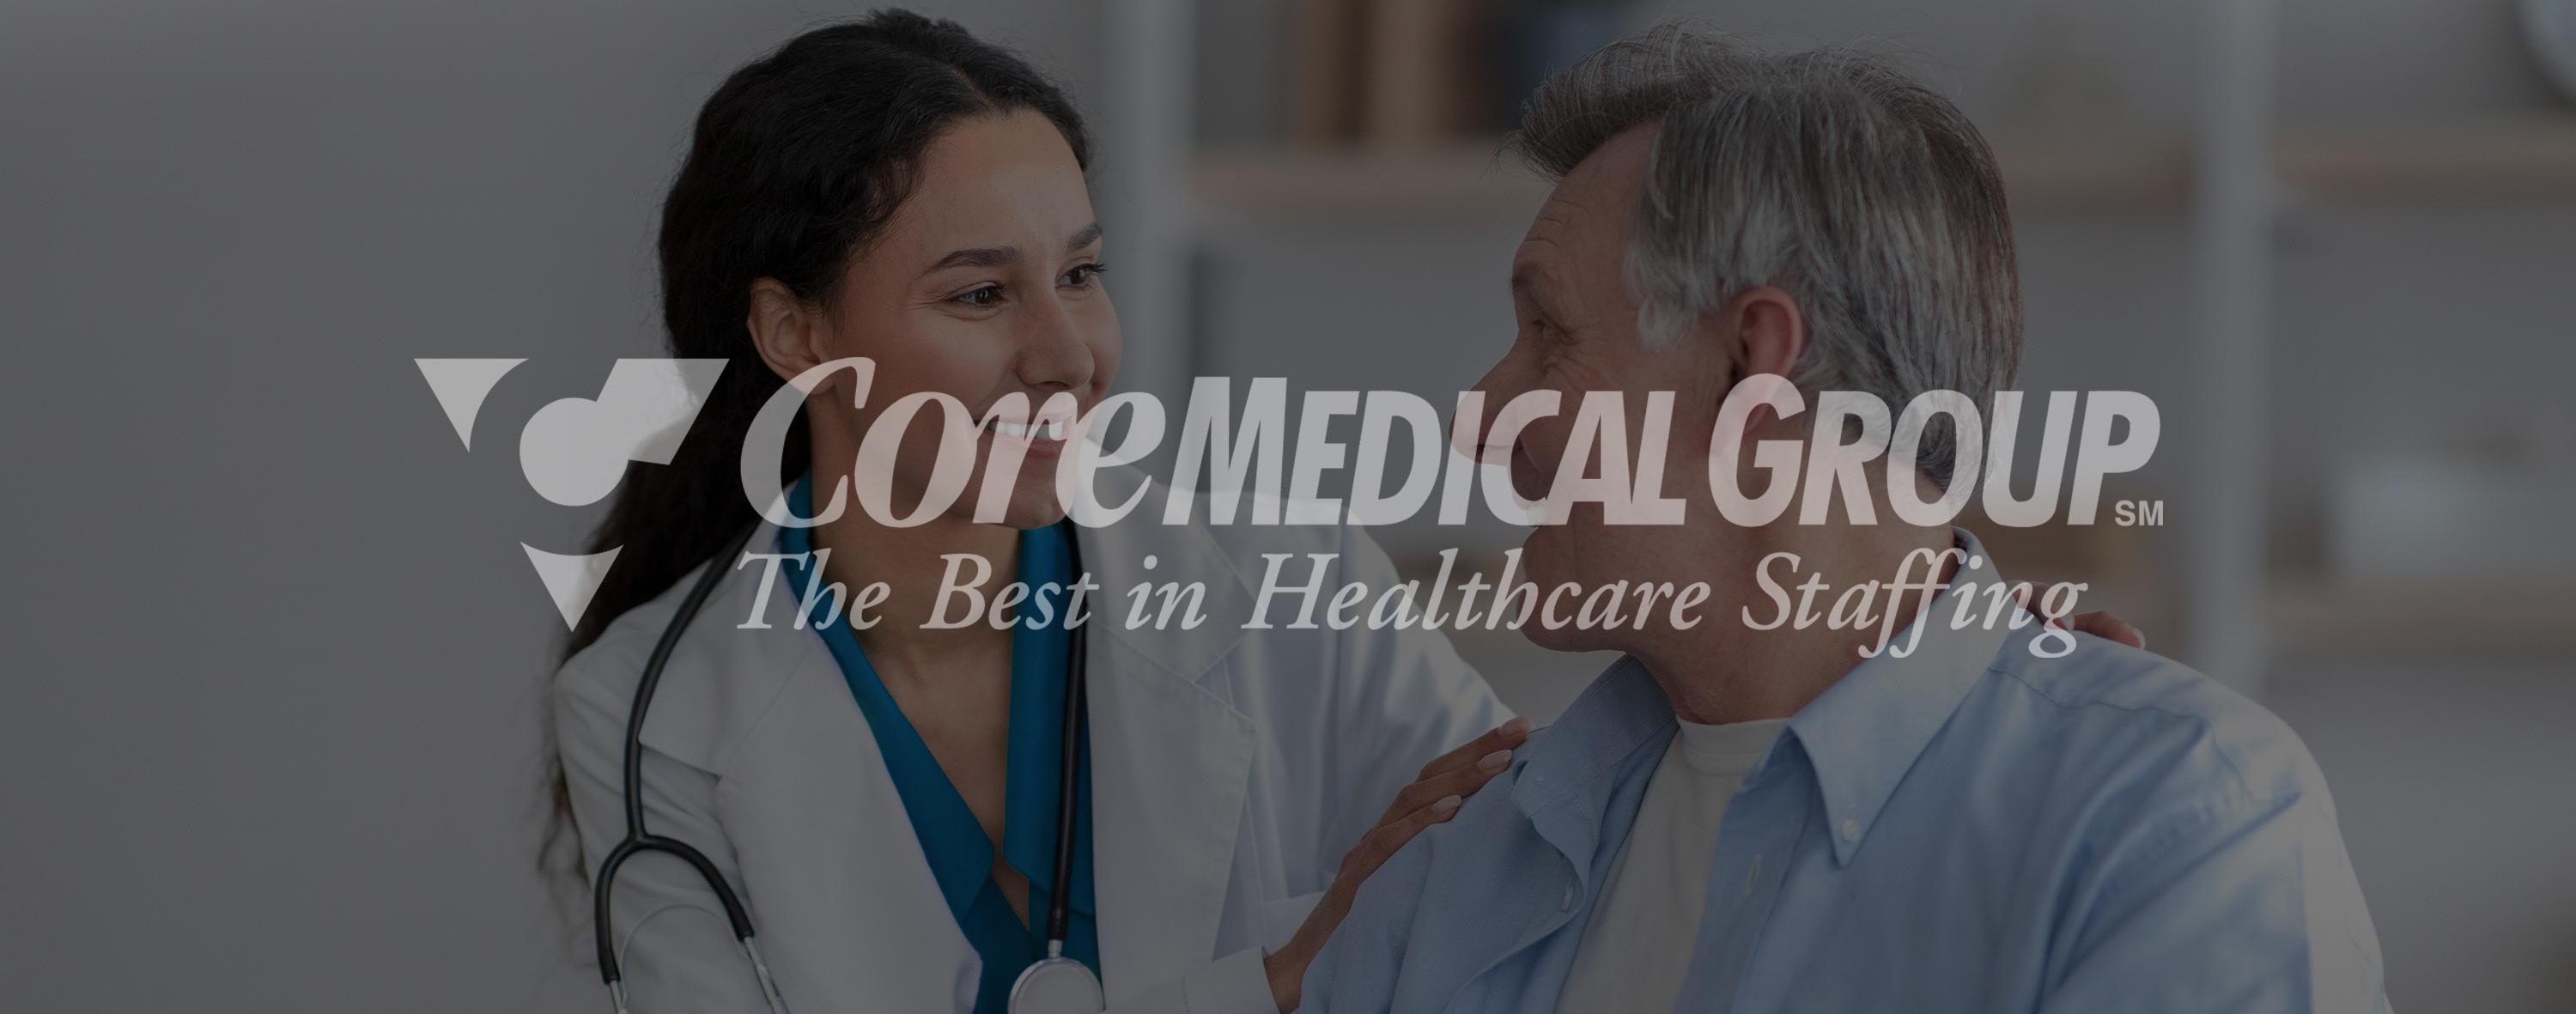 8 Non-Clinical Jobs for Physical Therapists - CoreMedical Group